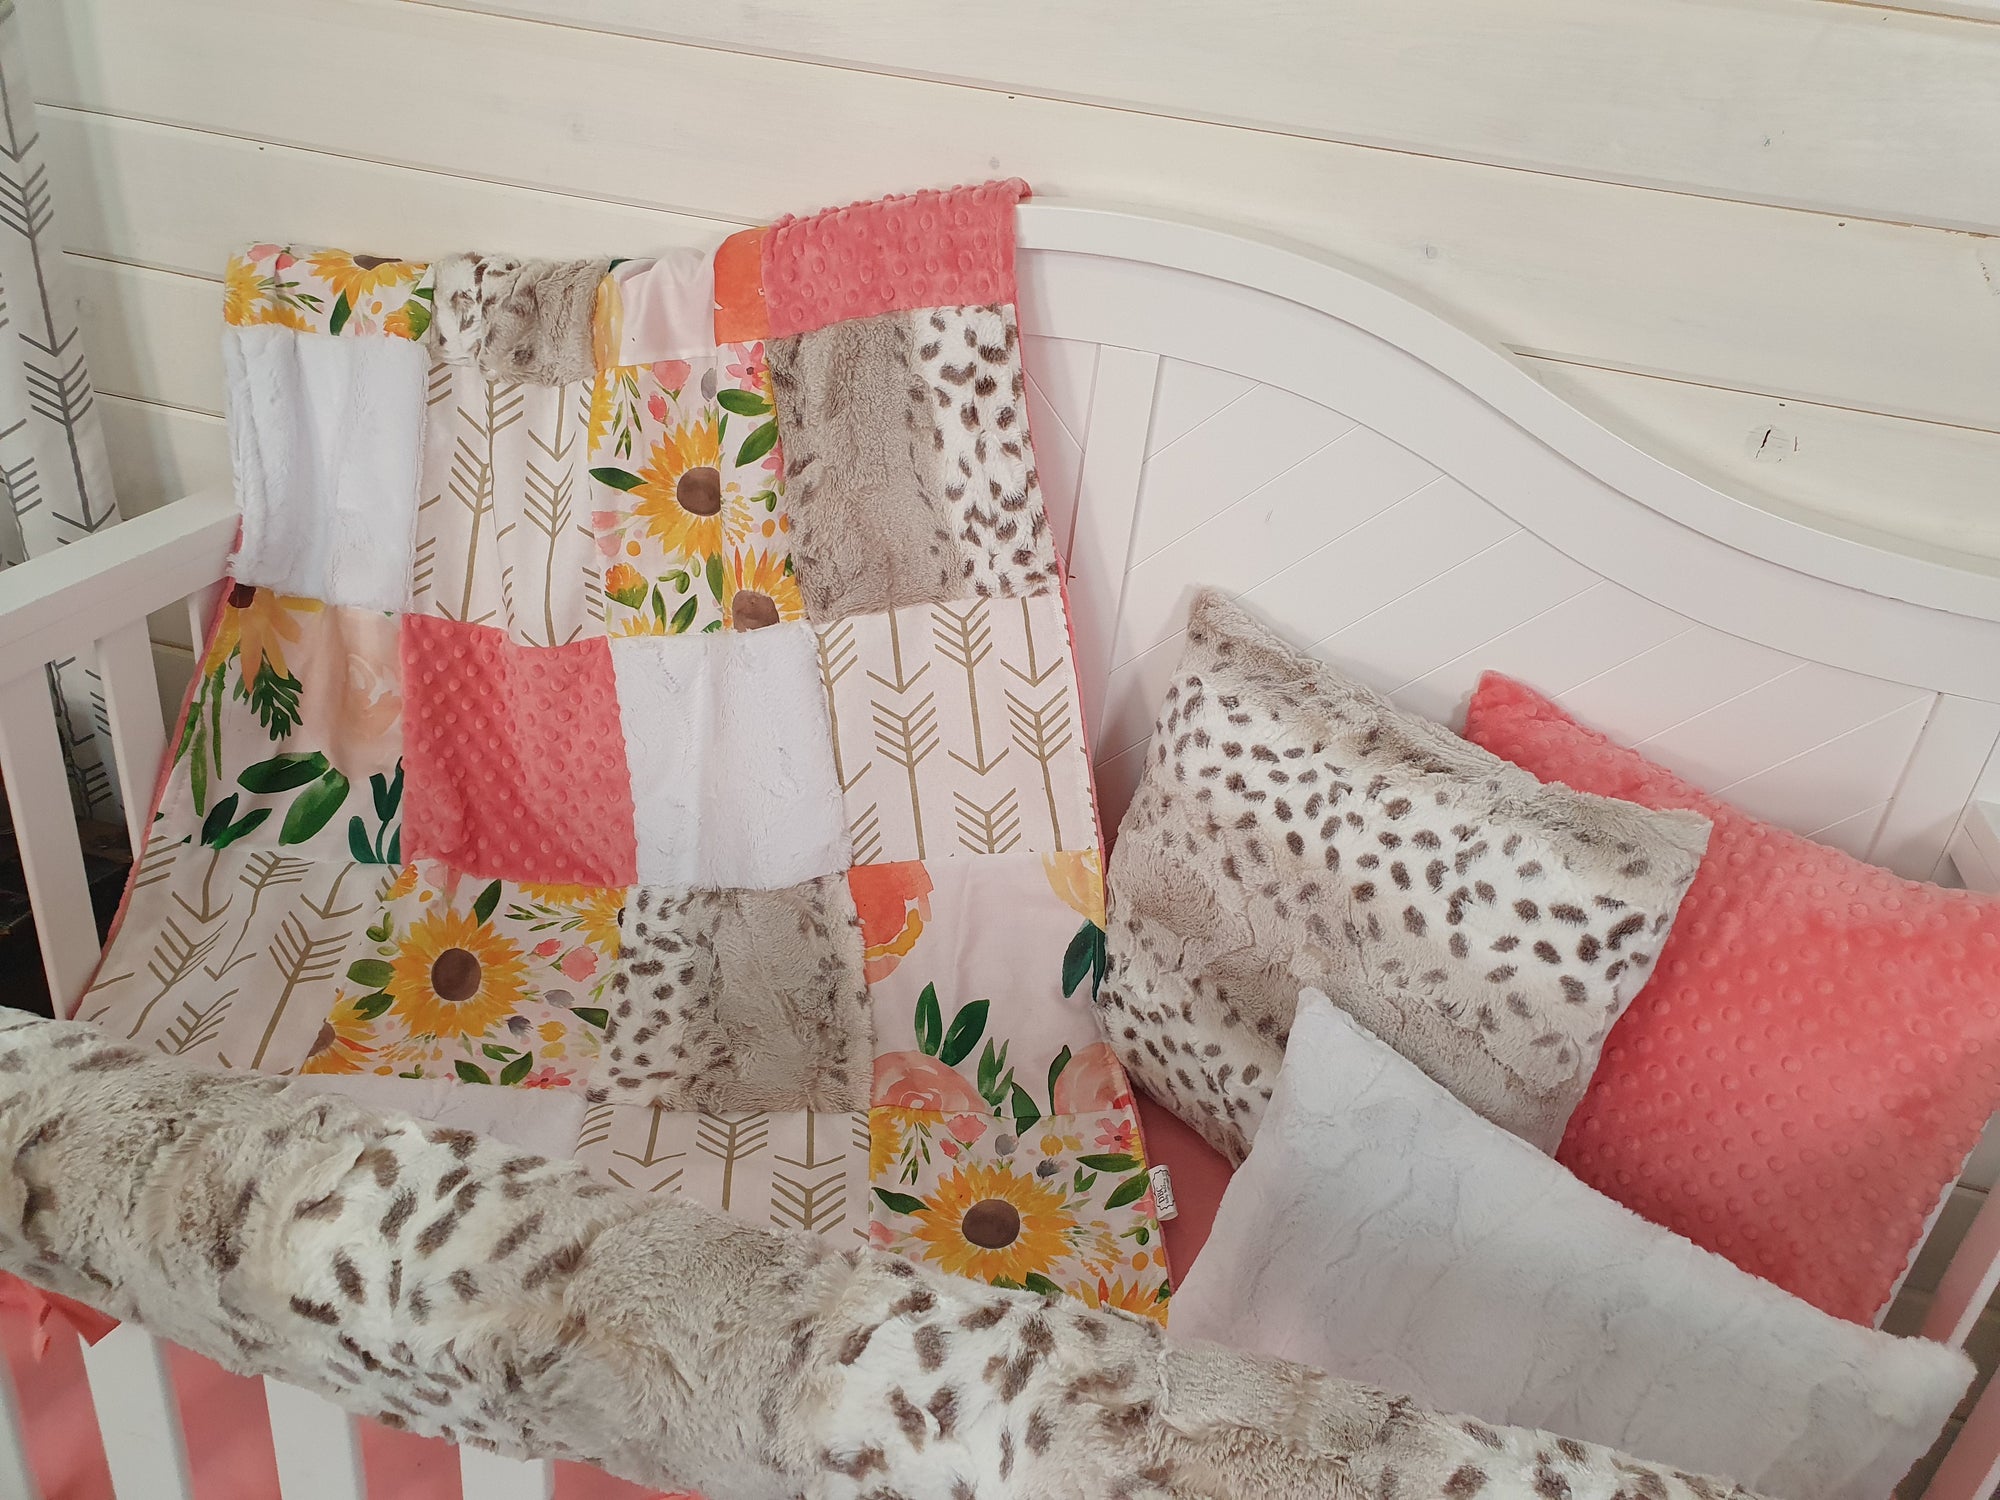 New Release Girl Crib Bedding- Sunflower and Lynx Minky Floral Baby Bedding & Nursery Collection - DBC Baby Bedding Co 